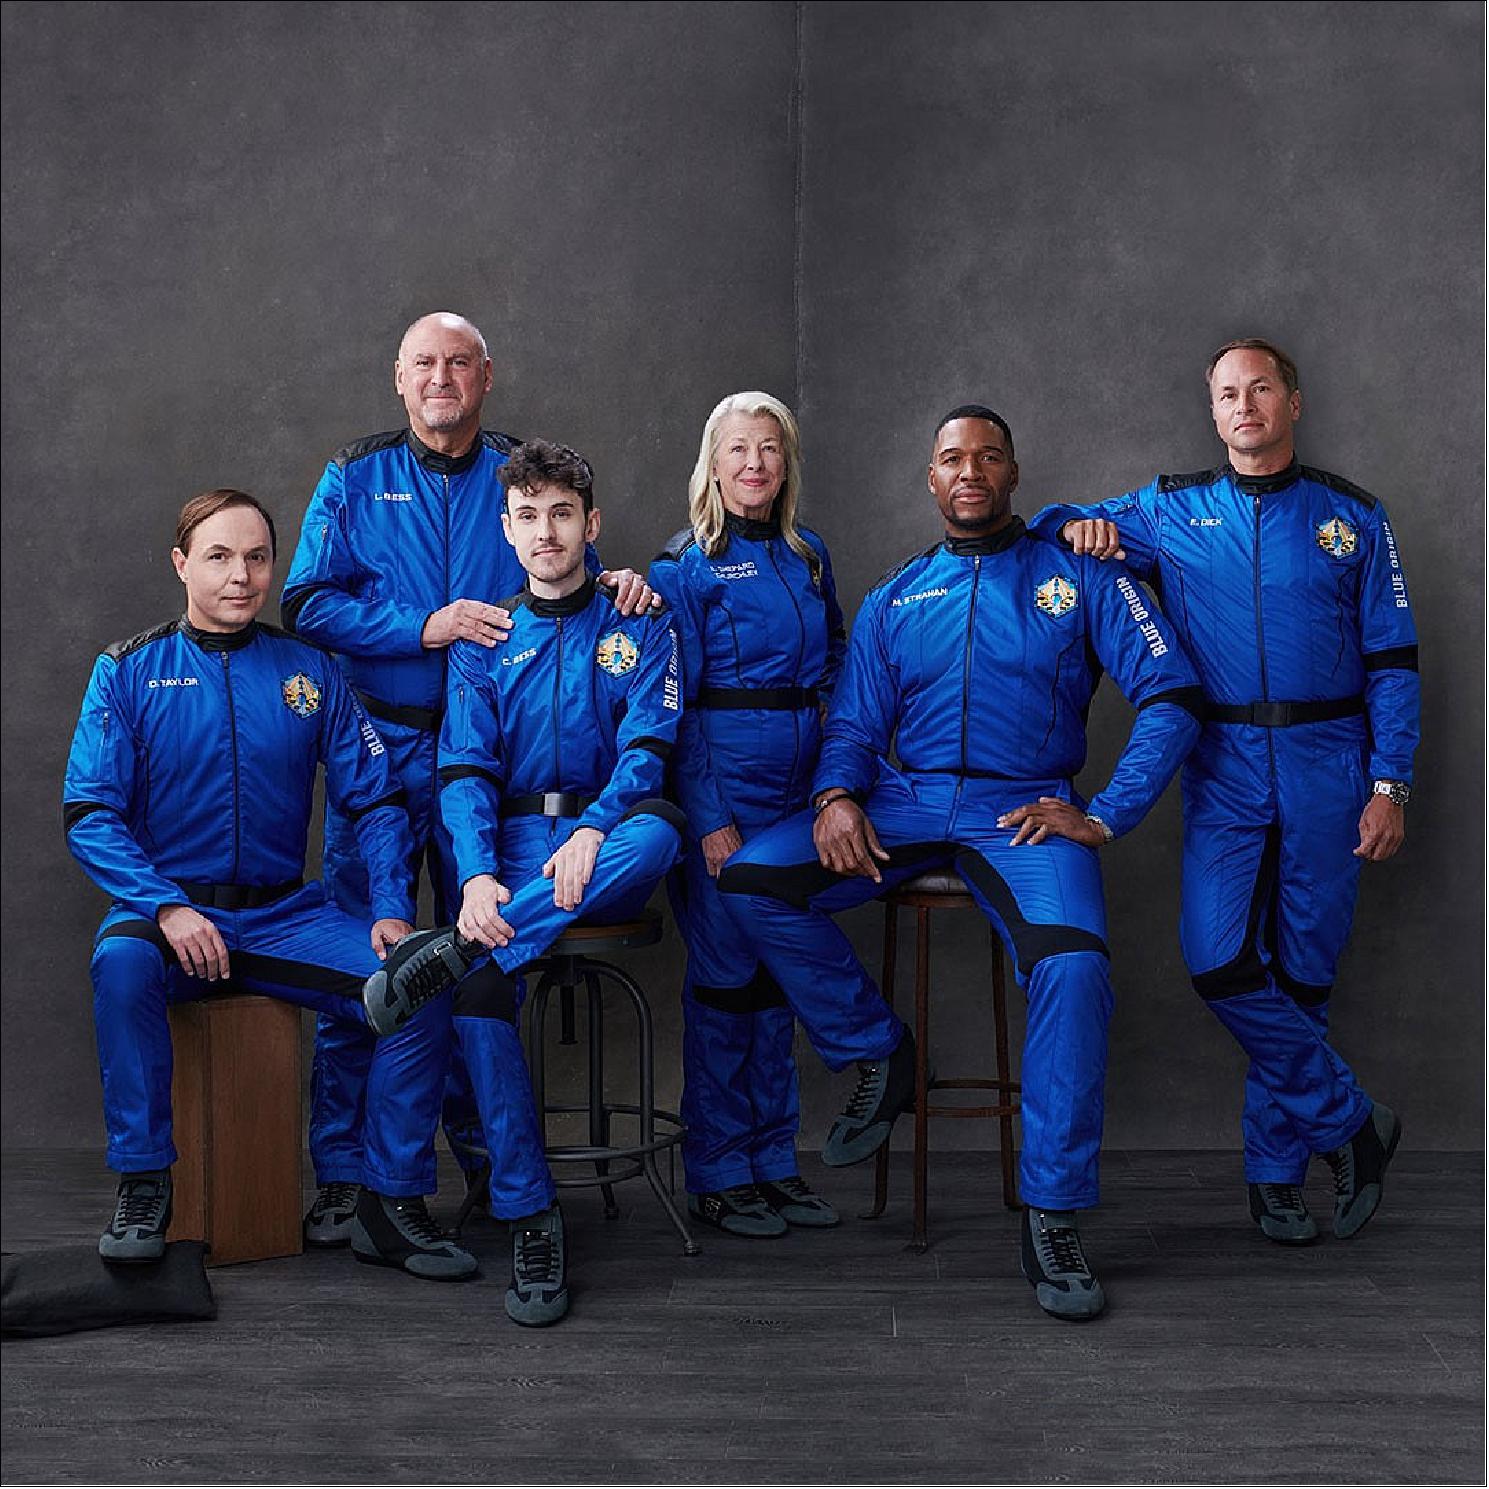 Figure 8: The crew of New Shepard NS-19. Pictured from left to right: Dylan Taylor, Lane Bess, Cameron Bess, Laura Shepard Churchley, Michael Strahan, and Evan Dick (image credit: Blue Origin) 8)